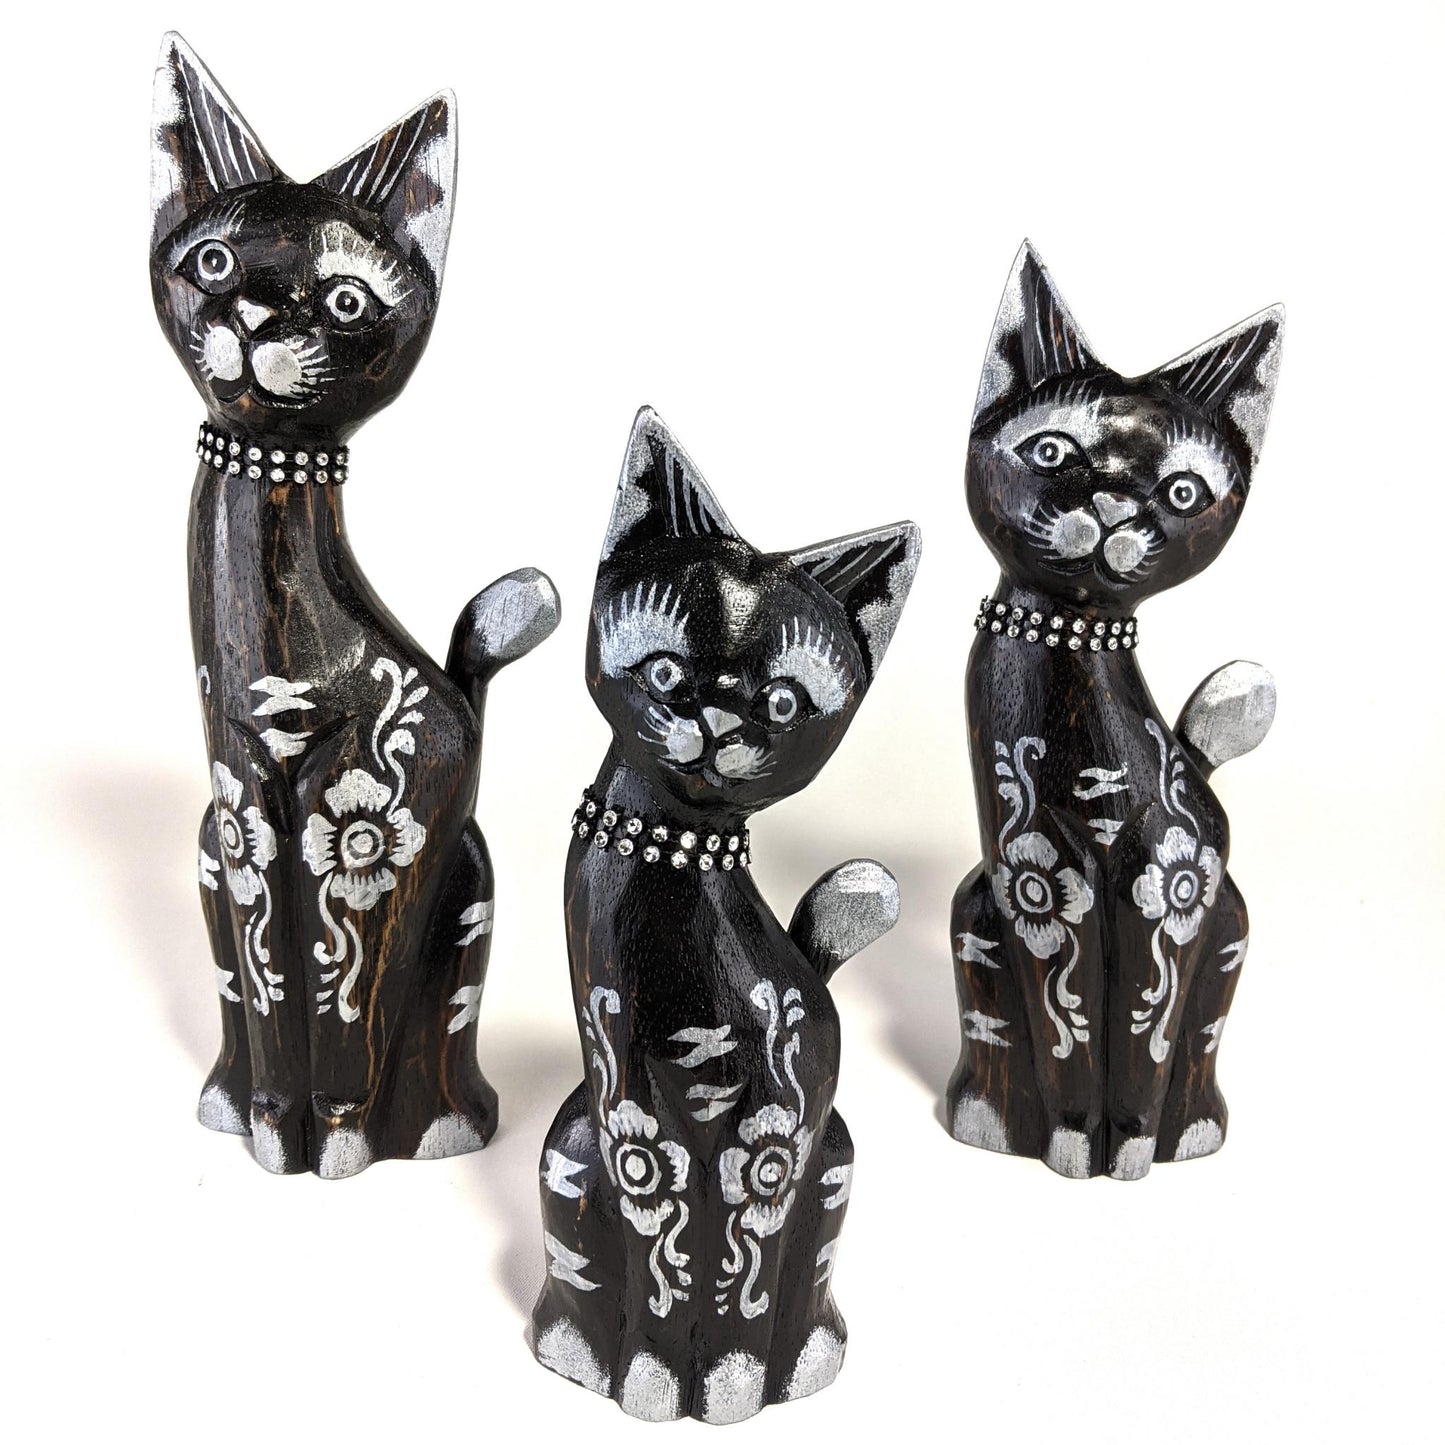 Antique  Cats Small Set of 3